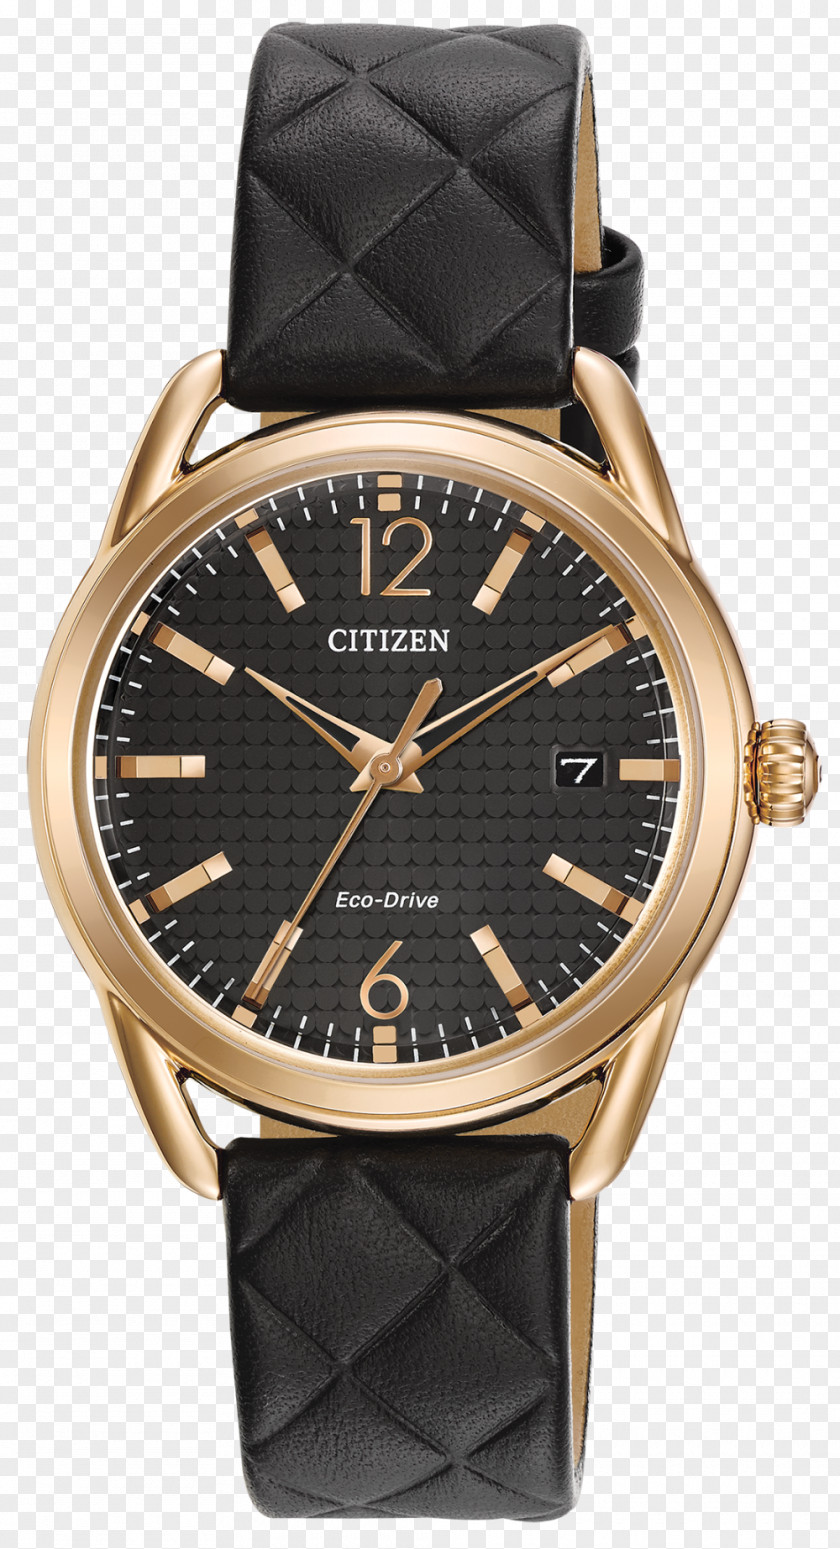 Watch Eco-Drive Strap Citizen Holdings Analog PNG